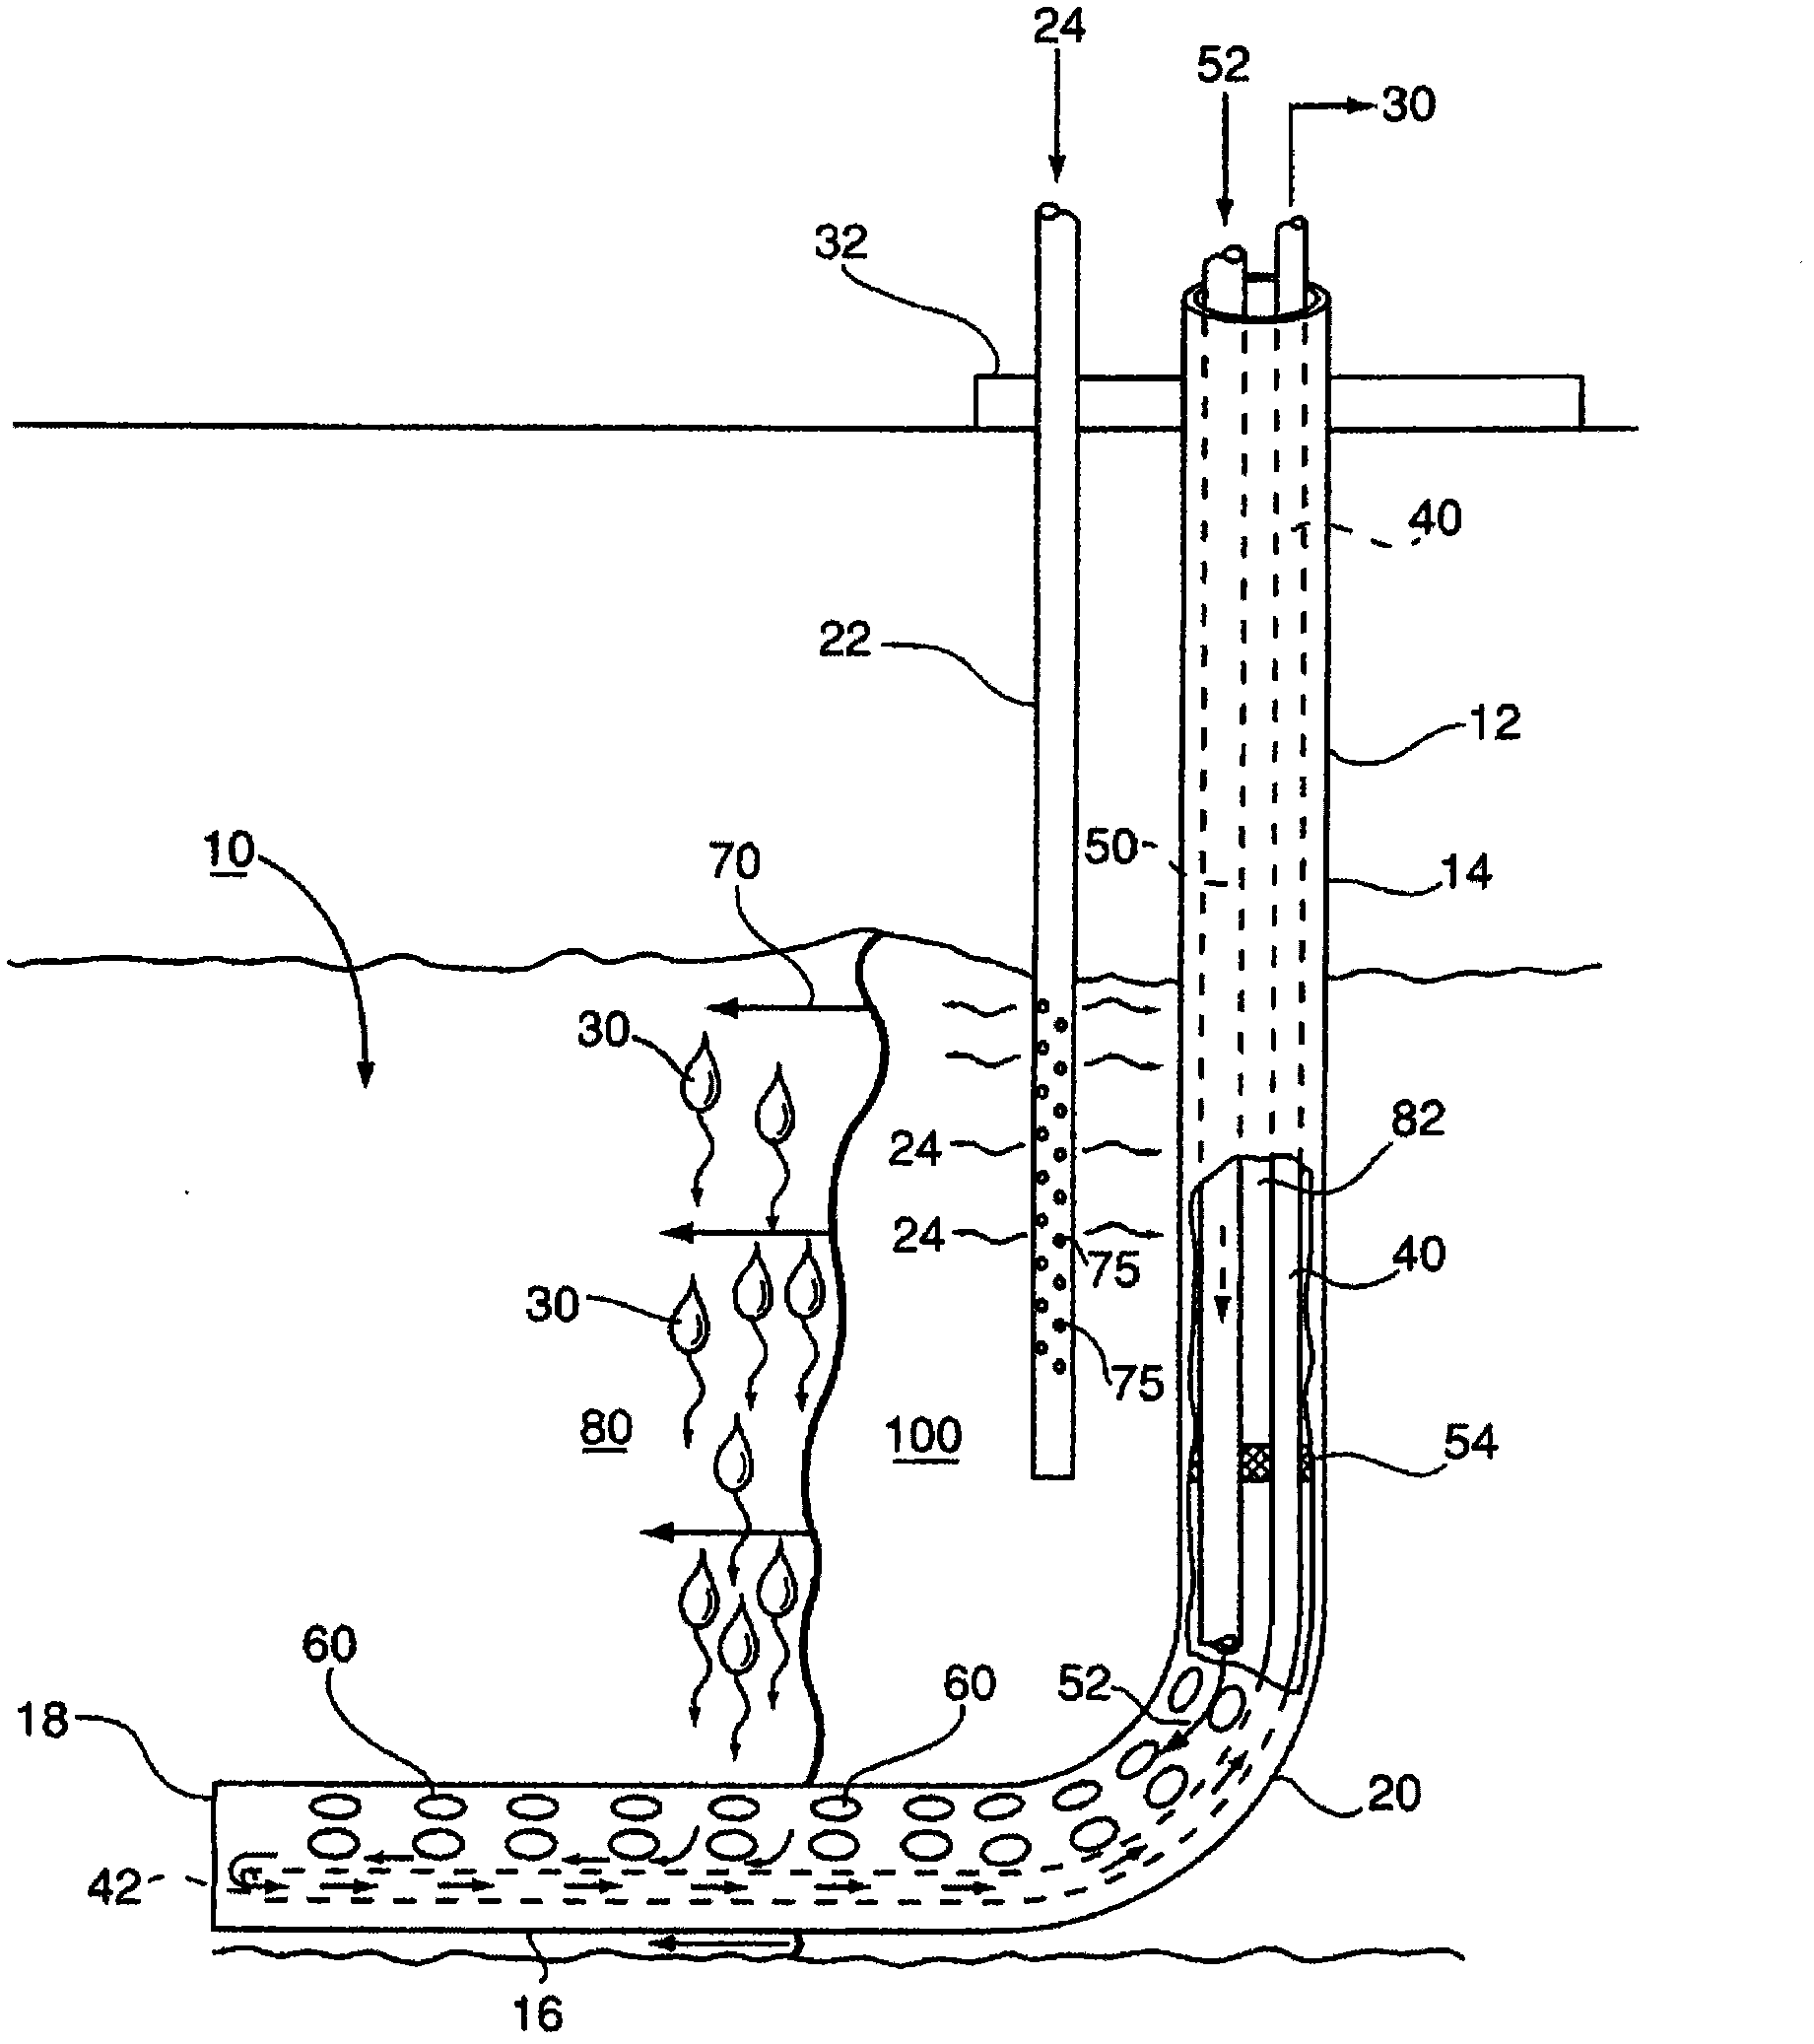 A modified process for hydrocarbon recovery using in situ combustion